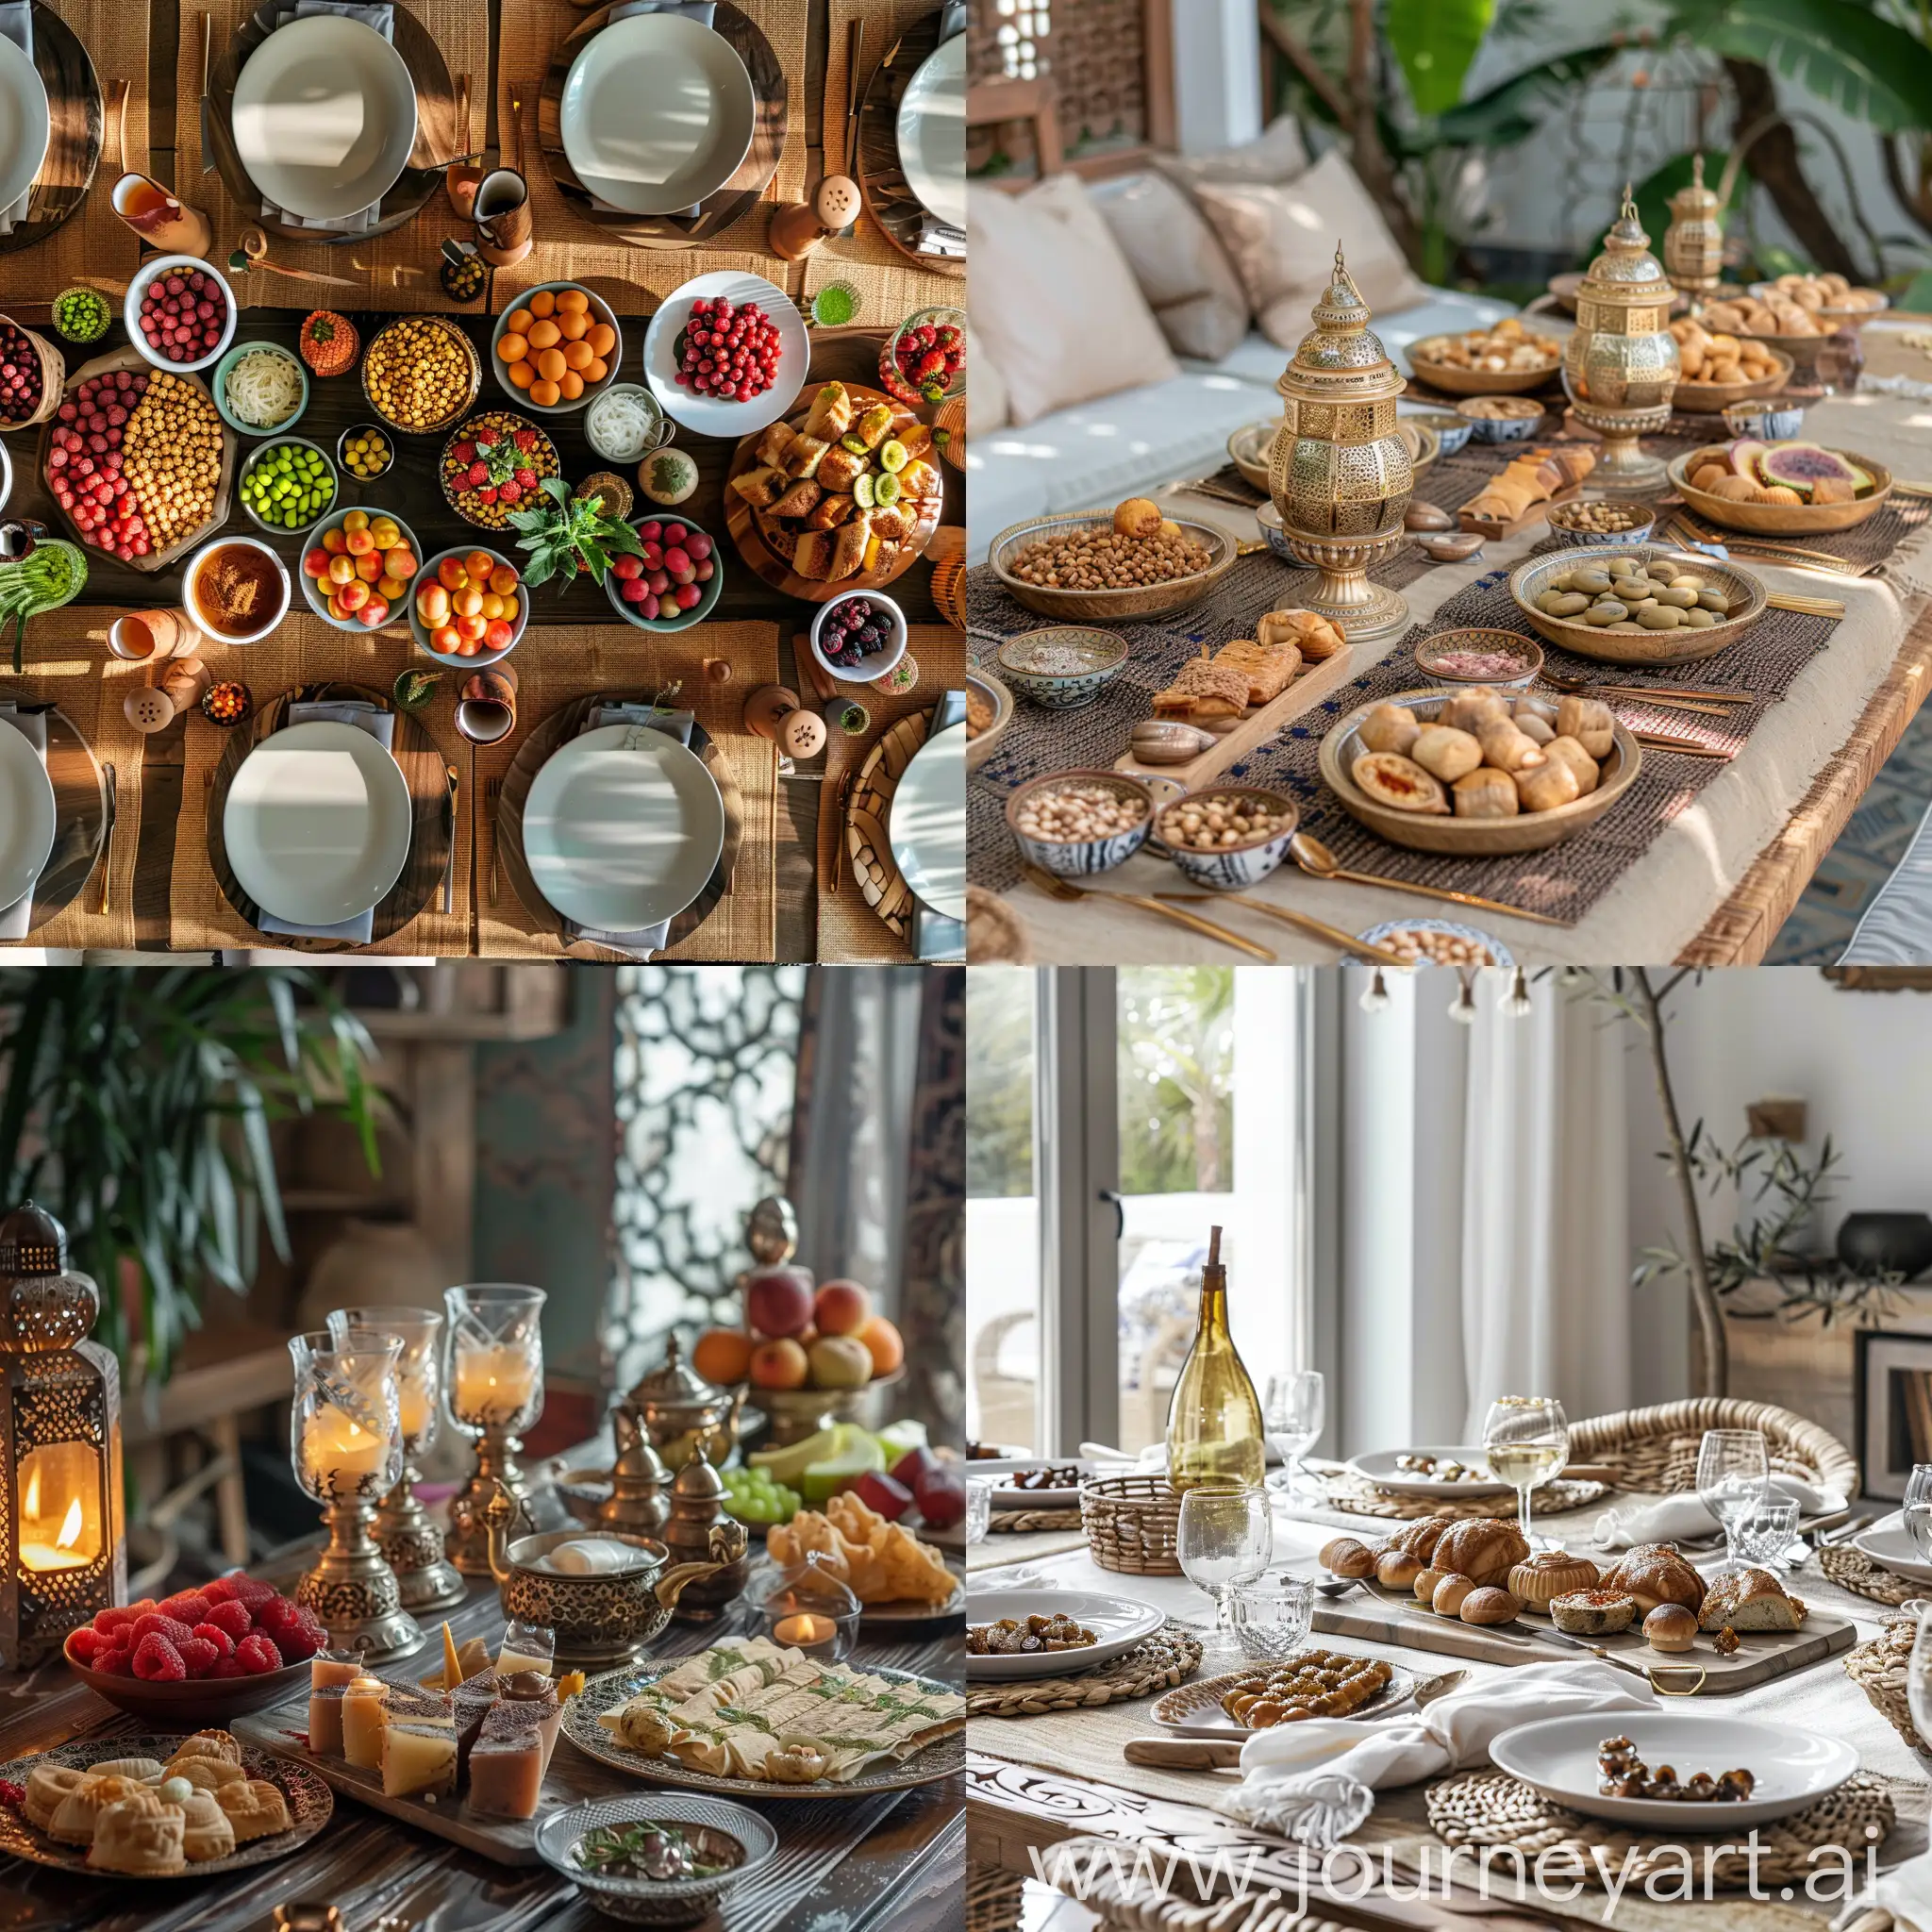 Authentic-Iftar-Table-Gathering-with-Traditional-Ramadan-Dishes